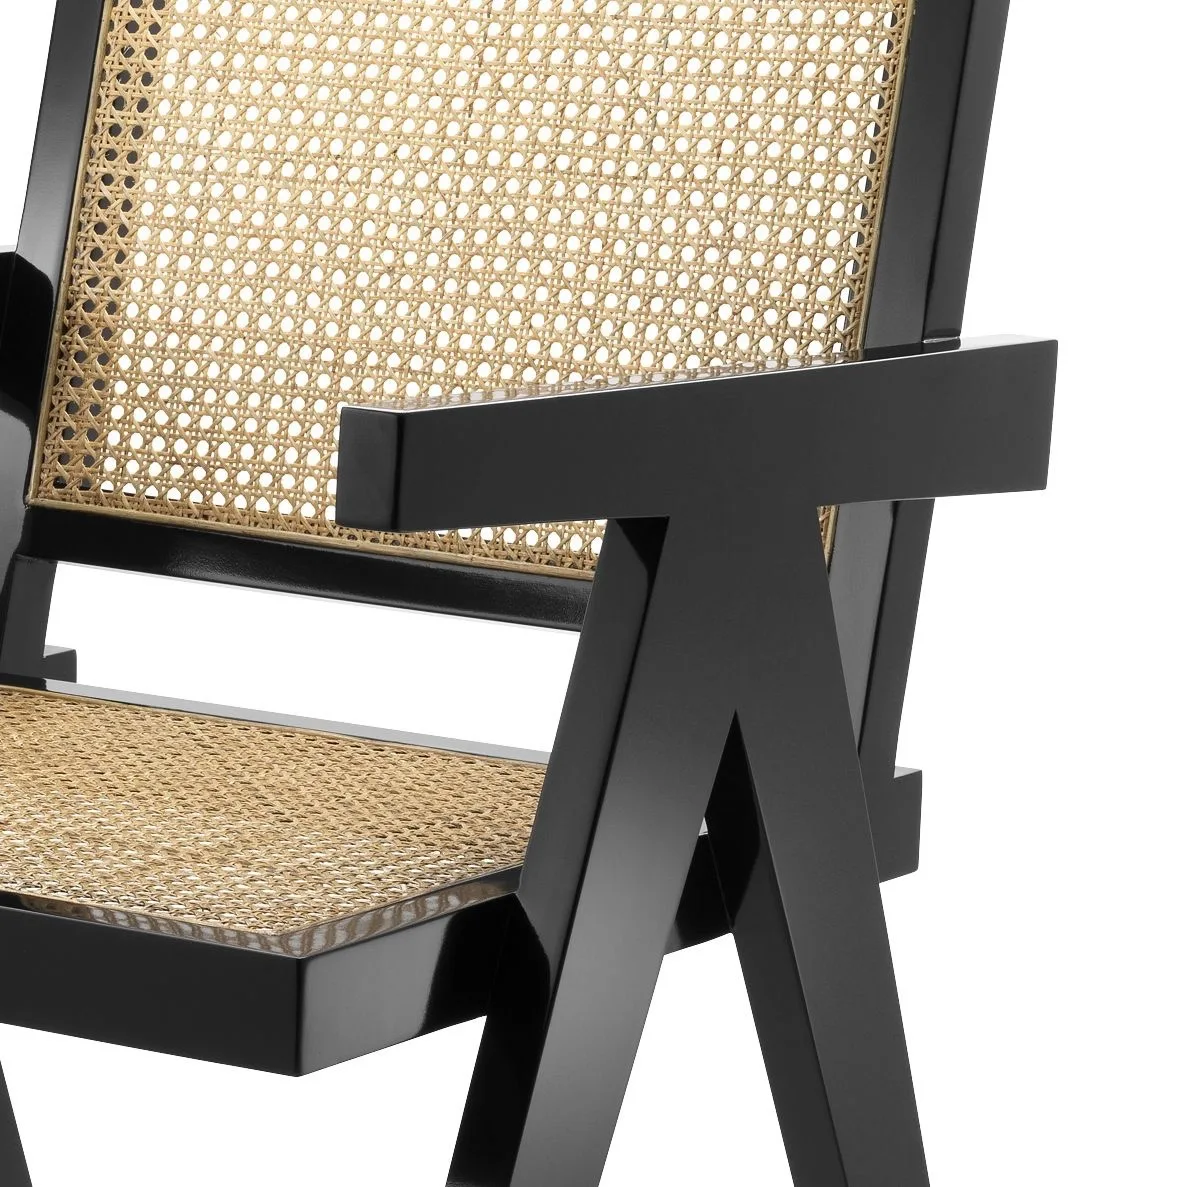 
Rattan cane dining chair 